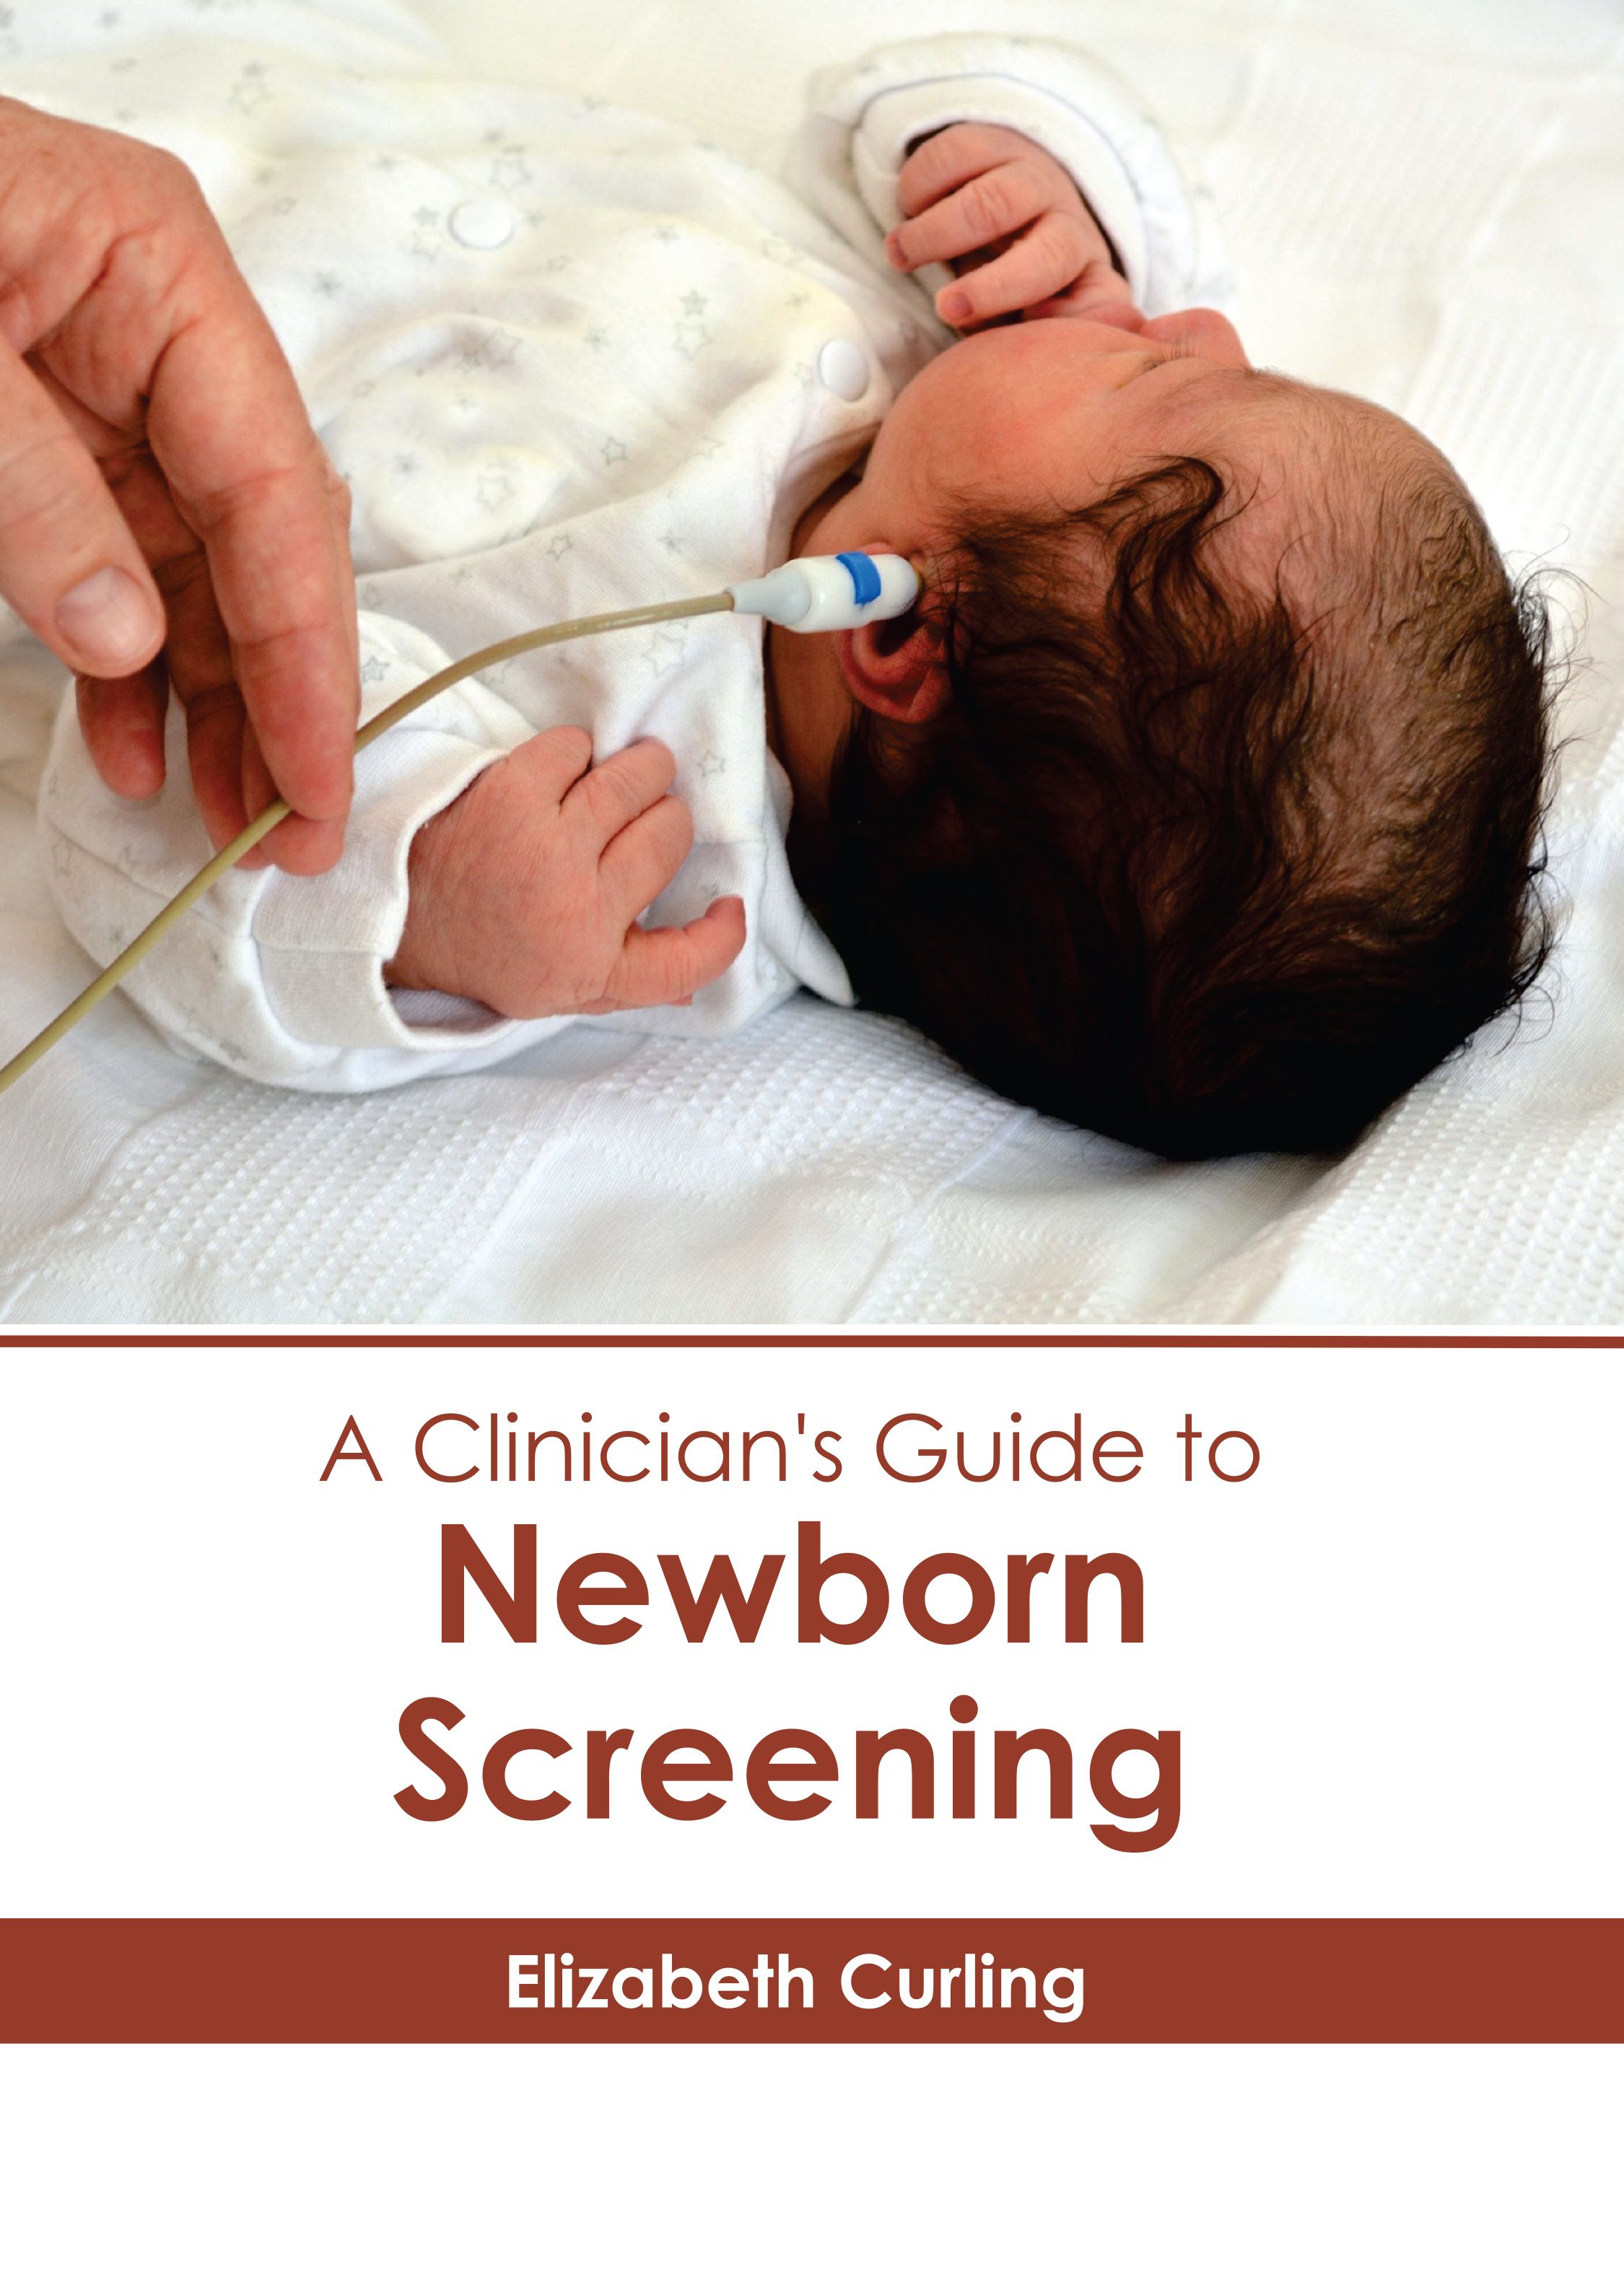 

exclusive-publishers/american-medical-publishers/a-clinician-s-guide-to-newborn-screening-9781639275762